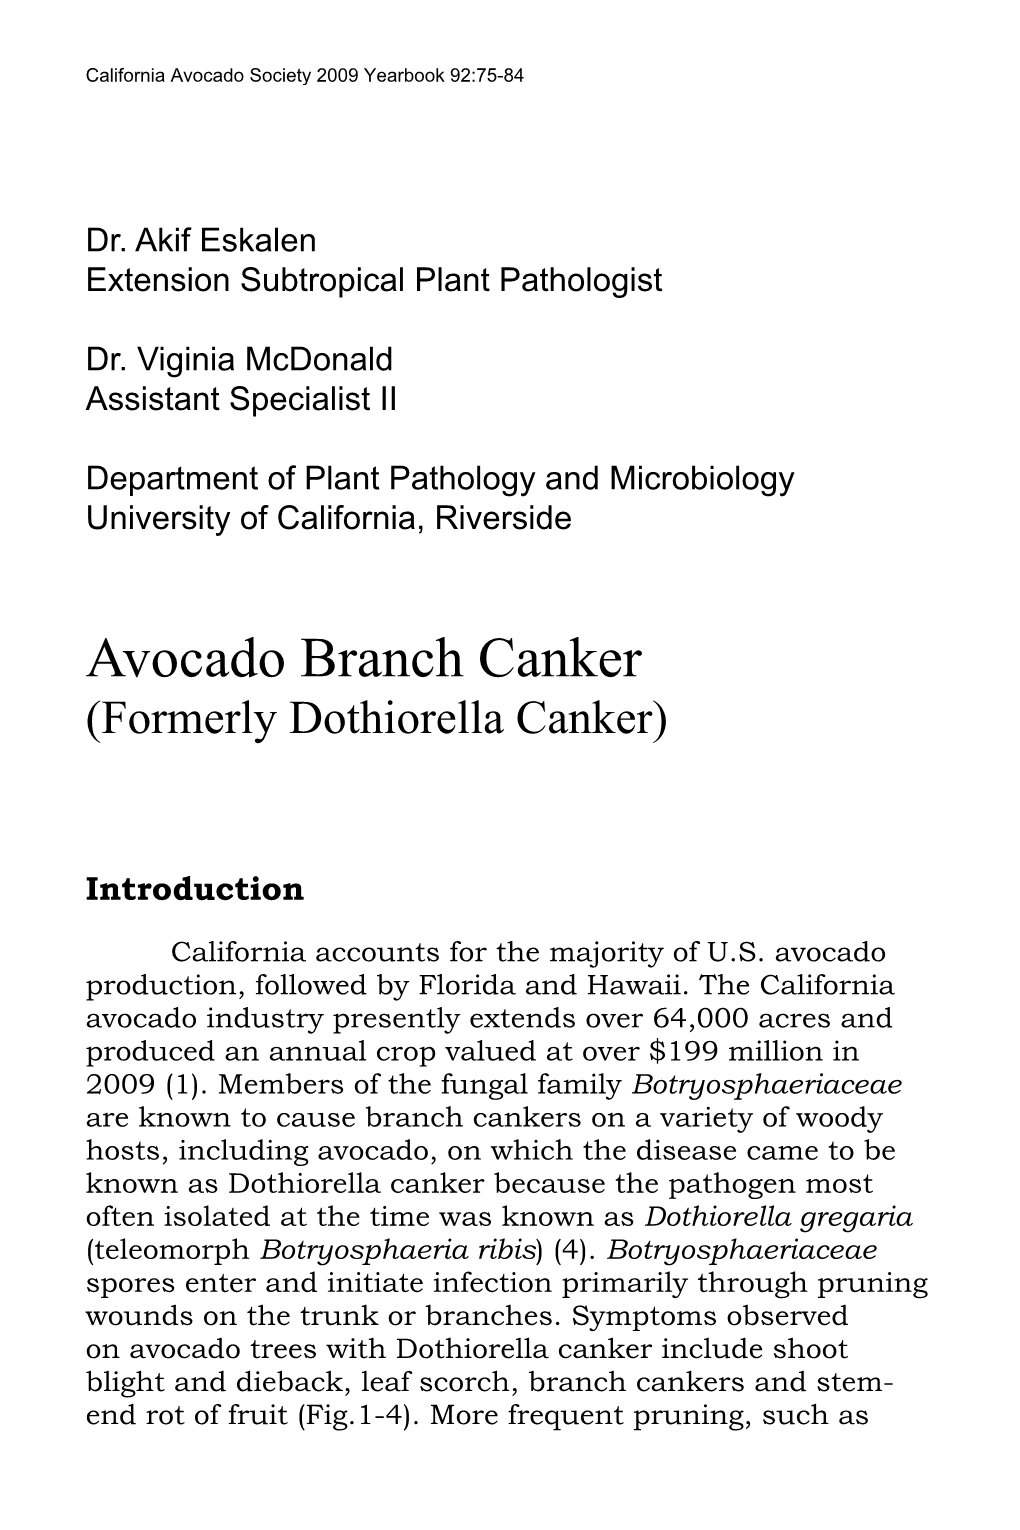 Avocado Branch Canker (Formerly Dothiorella Canker)